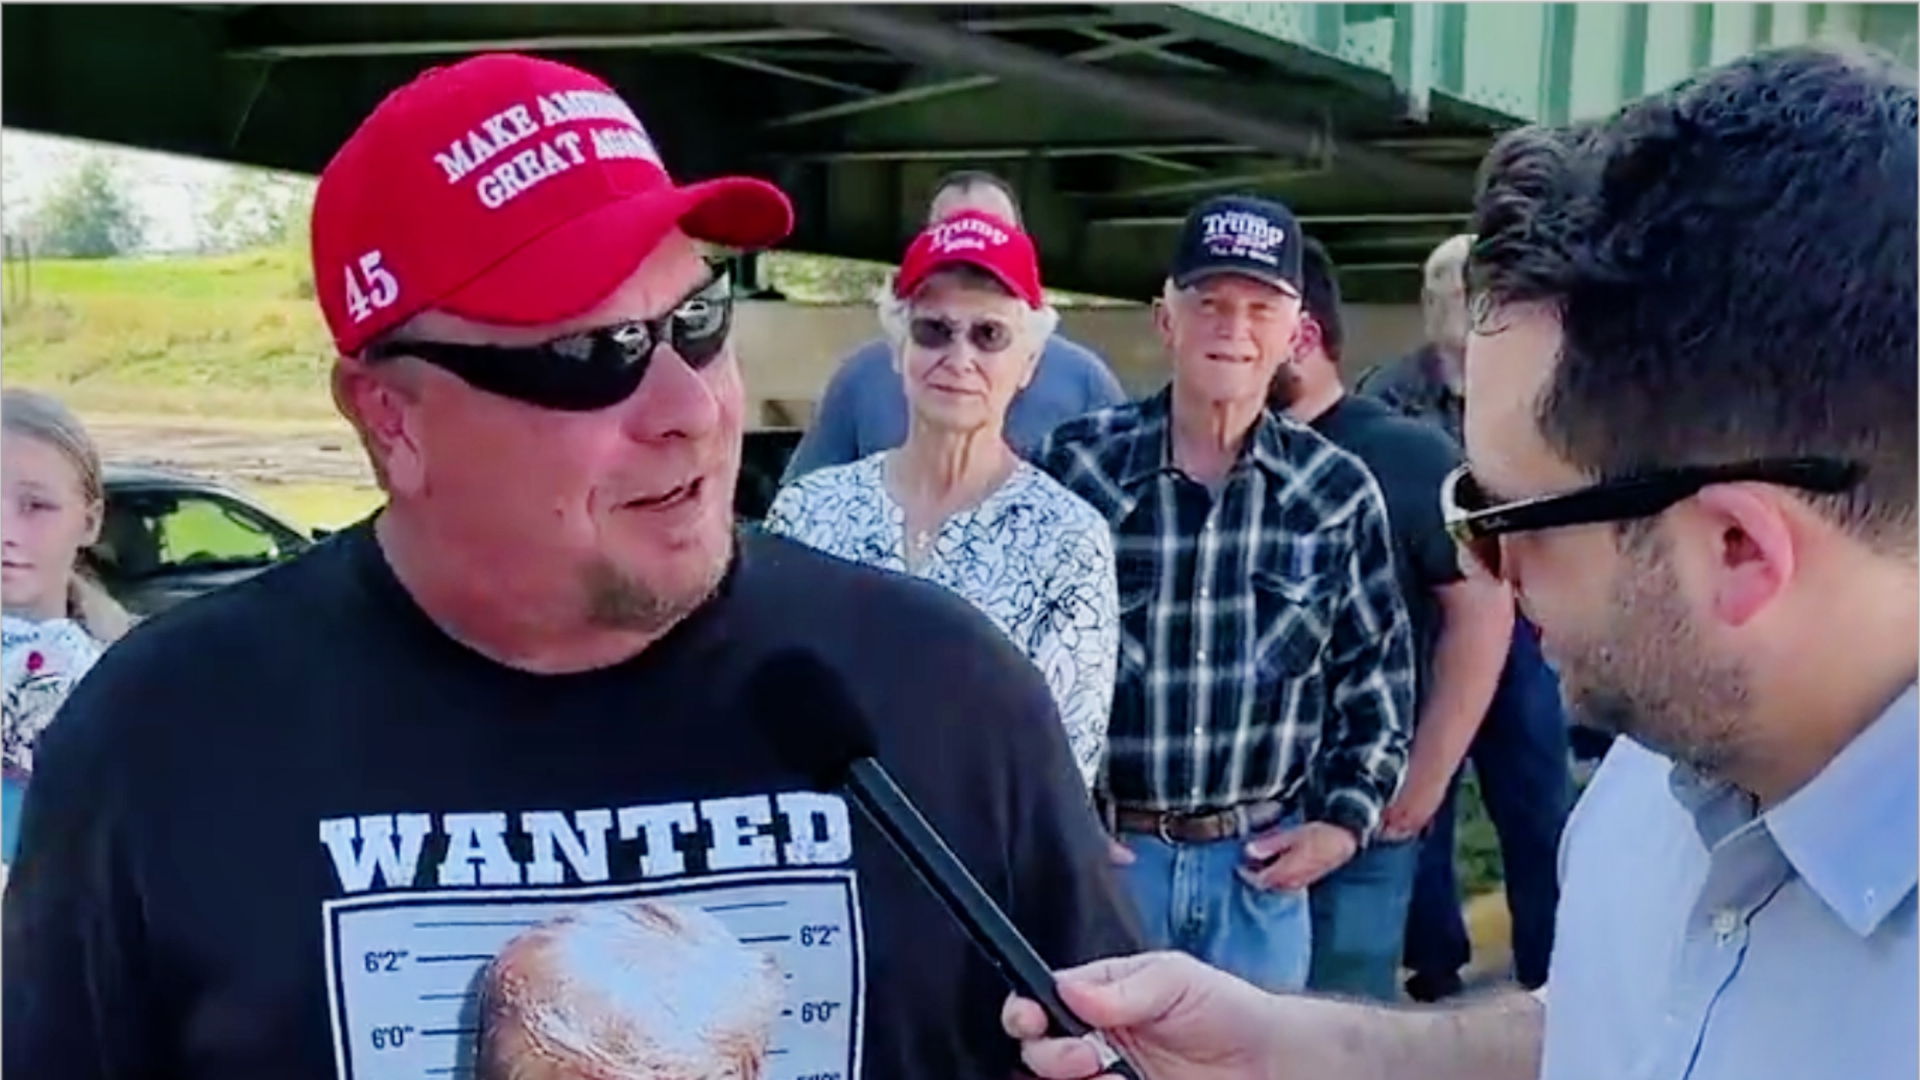 'That's Literally a Picture of Him Surrendering!' Trump Fan Confronted Outside Rally Over His 'Never Surrender' T-Shirt